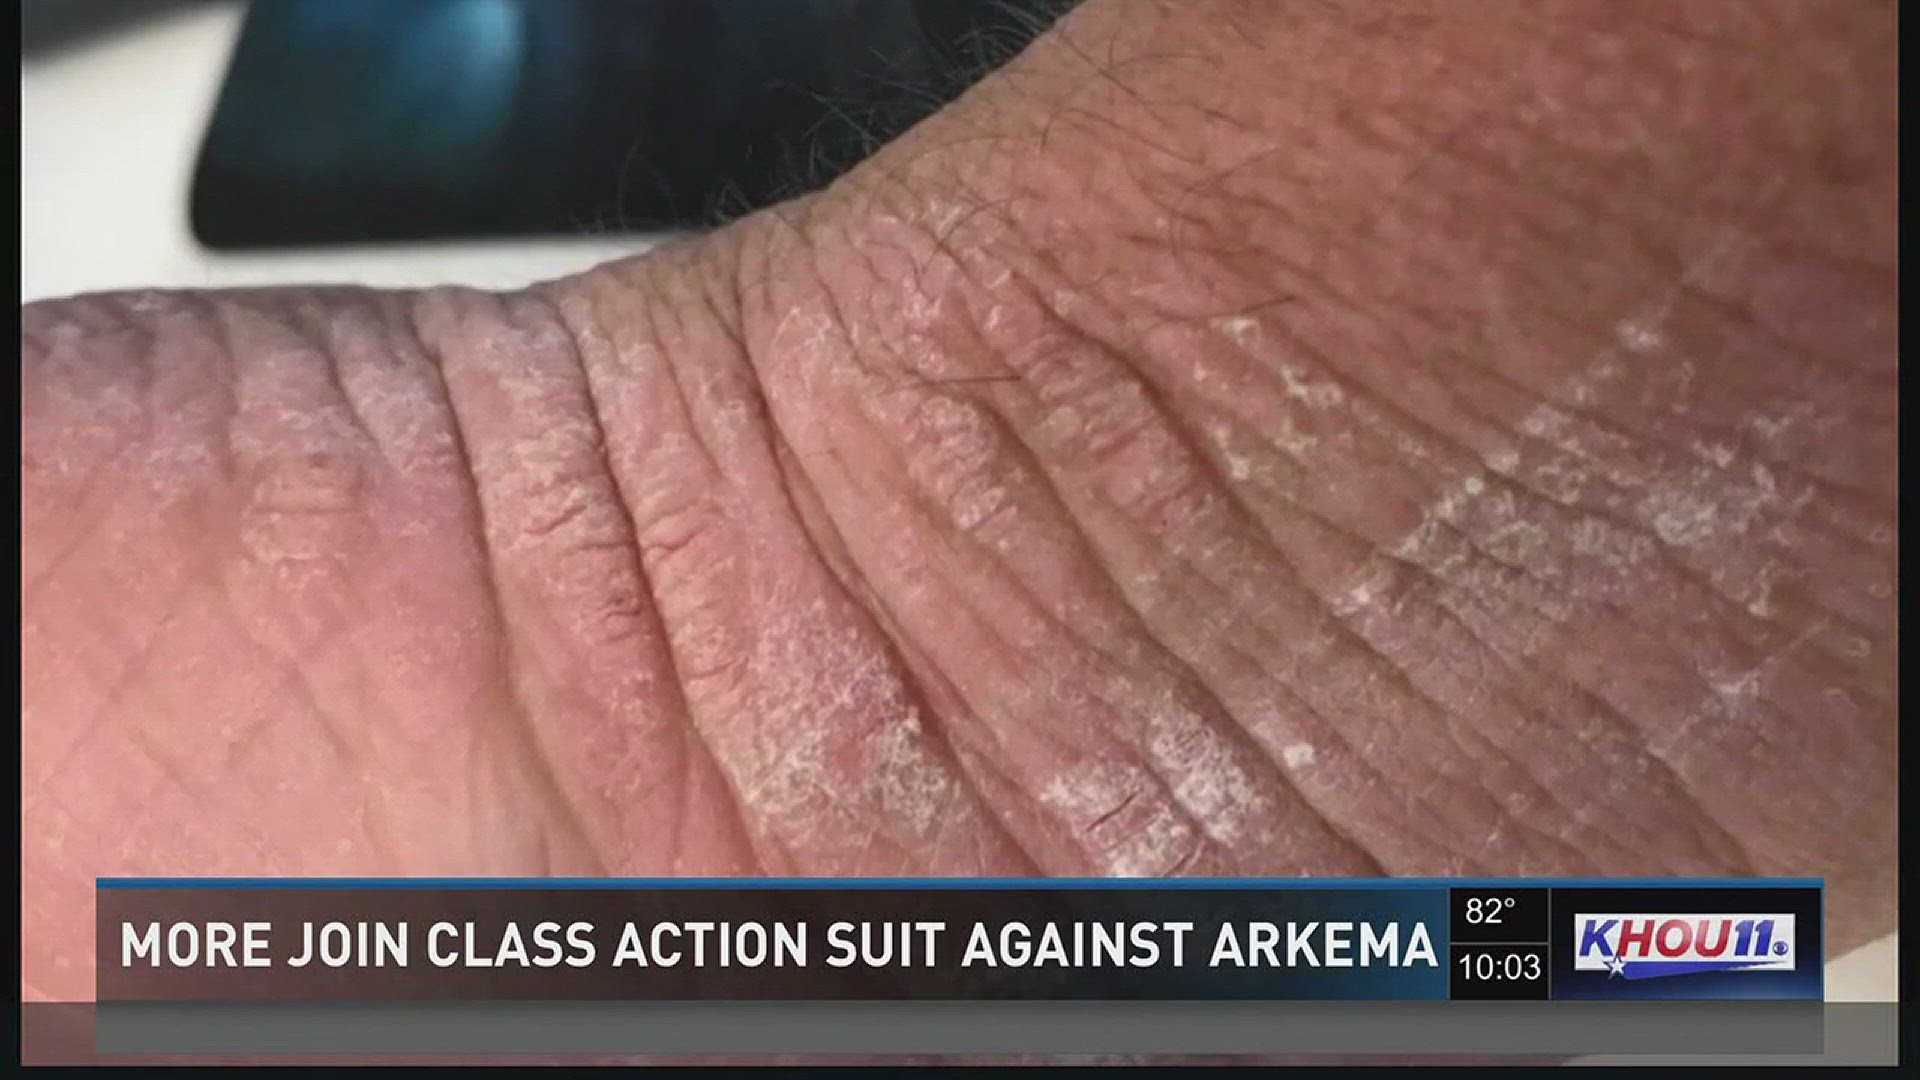 A Texas state trooper, Harris County sheriff?s deputy, and sergeant are among the more than a dozen Crosby residents who filed a class action lawsuit against Arkema on Tuesday in federal court in Houston.